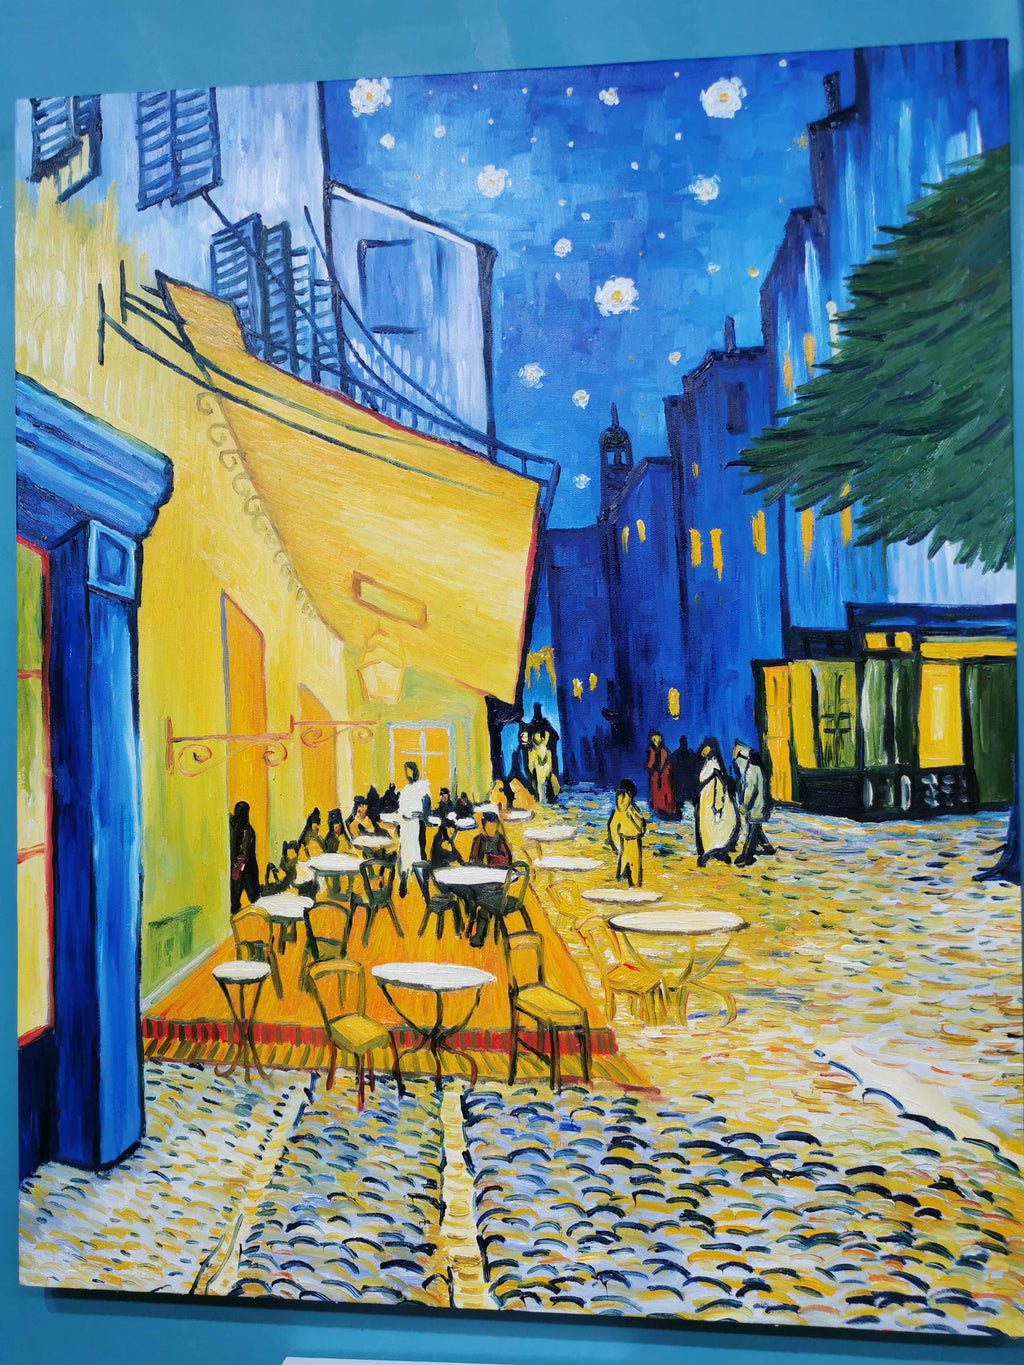 Framed 1 Panel - Oil Painting - Cafe Terrace at Night (Van Gogh)